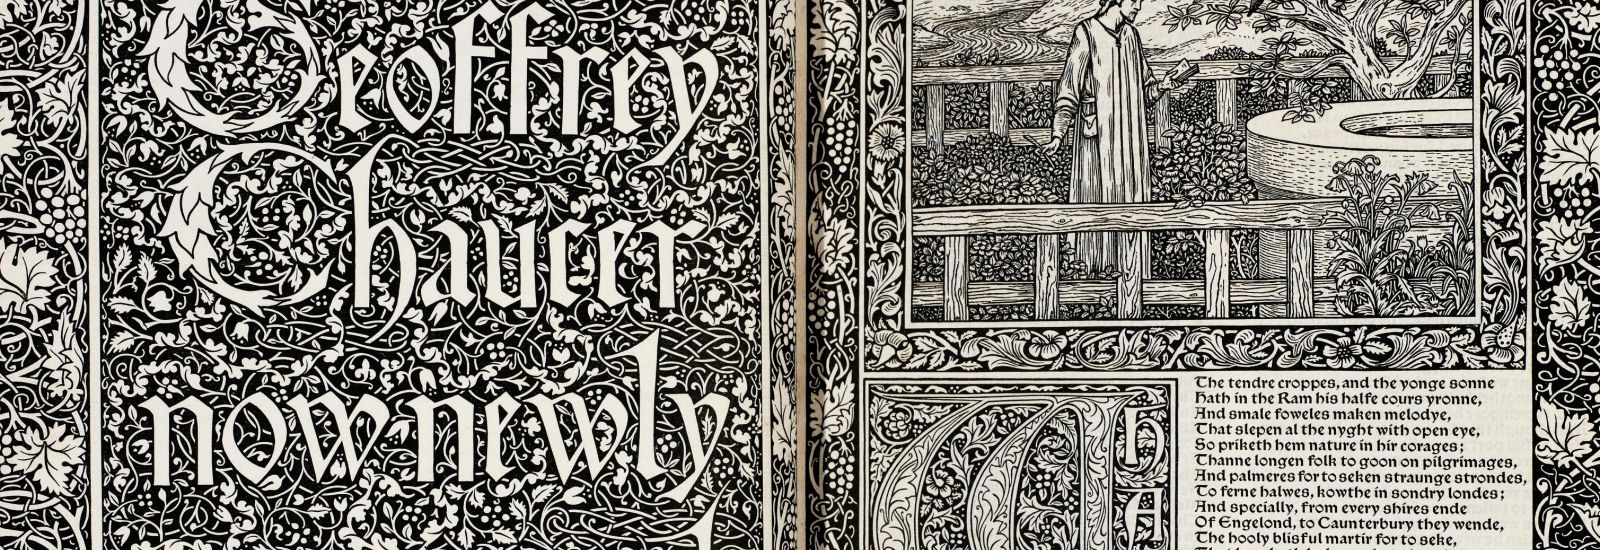 Open double-page spread of highly illustrated edition of The Canterbury Tales